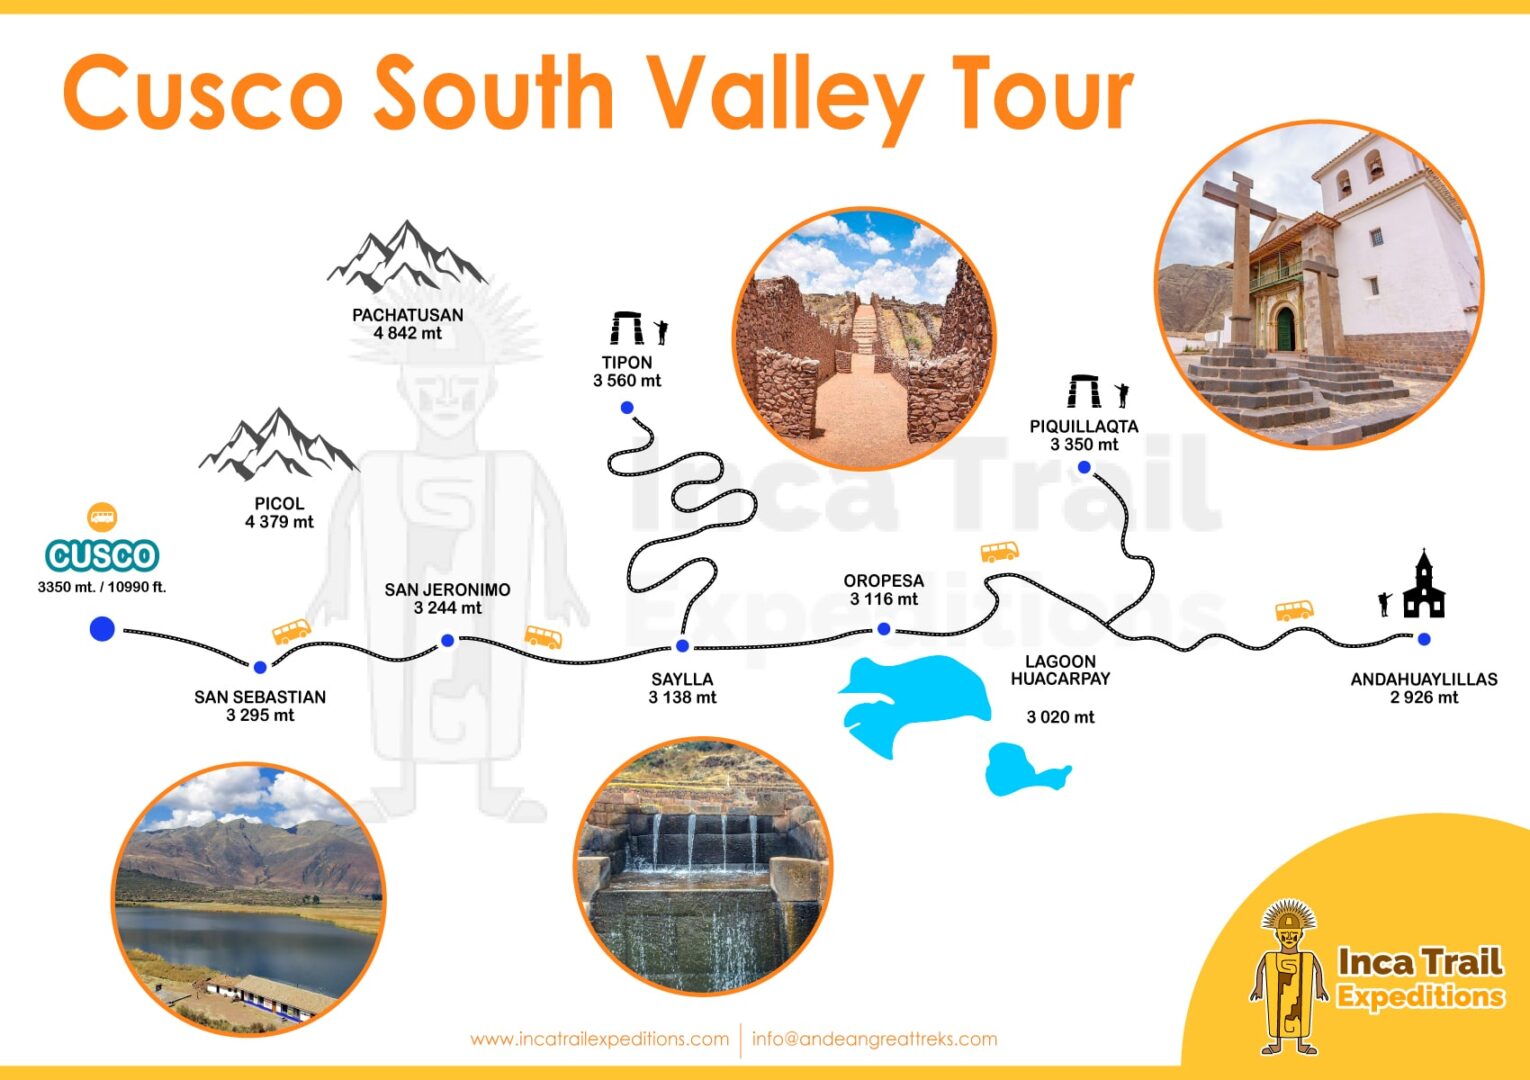 CUSCO-SOUTH-VALLEY-TOUR-BY-INCA-TRAIL-EXPEDITIONS